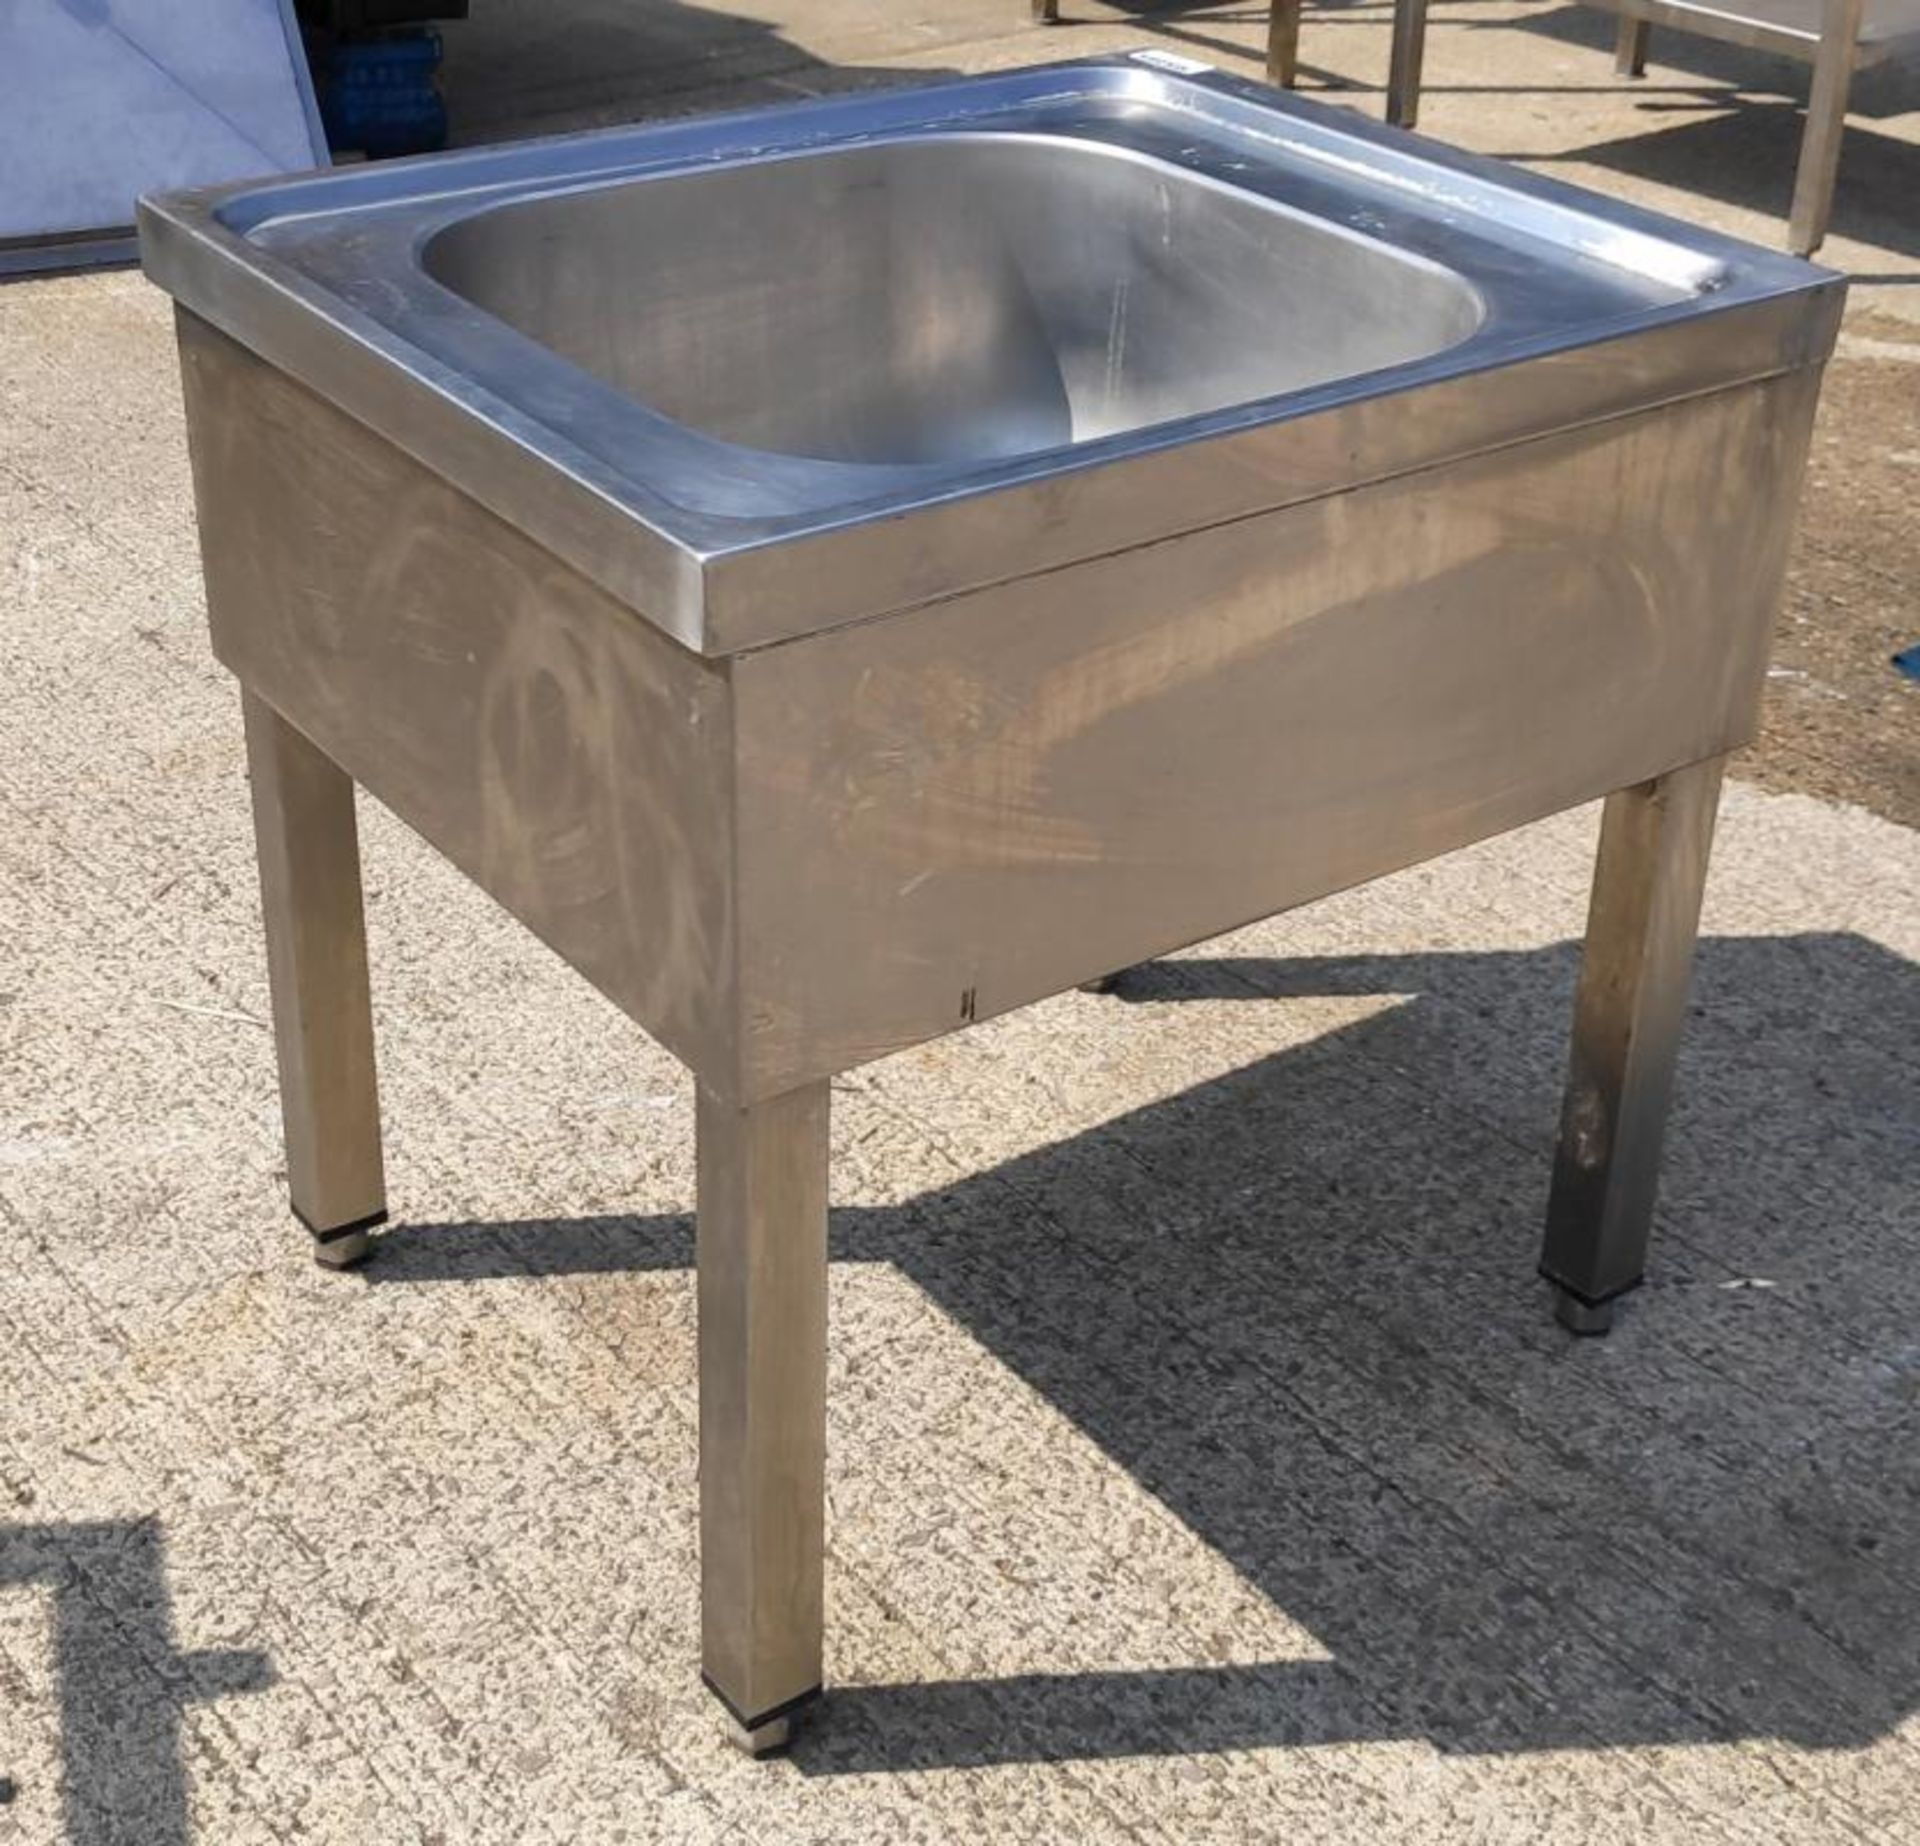 1 x Low Stainless Steel Commercial Kitchen Sink Unit - Dimensions: 50W x 60D x 60H cm - Very Recentl - Image 3 of 6